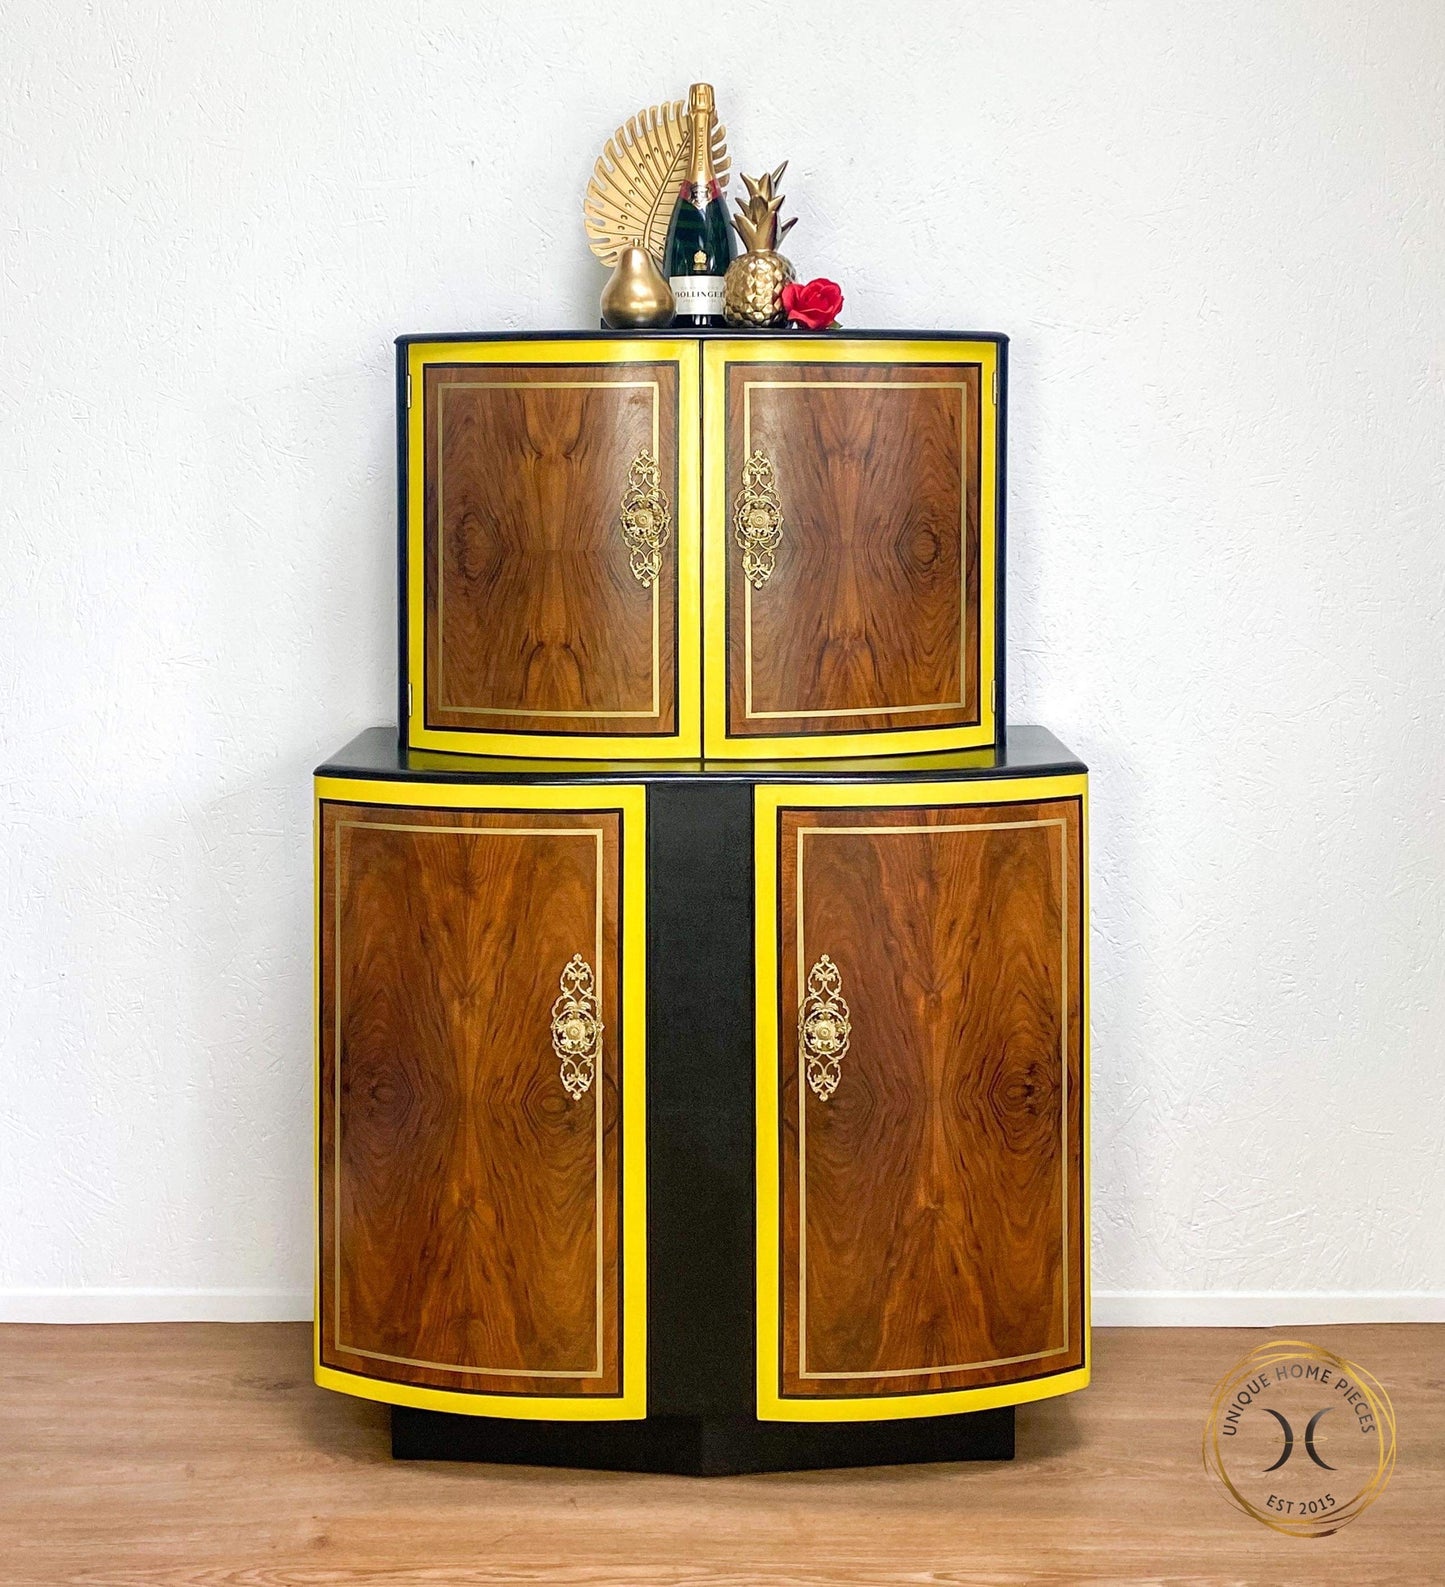 Stonehill cocktail cabinet, painted black internall and externally with the doors having a yellow, black and gold stripe detailing. sealed with osmo oil to protect the wanut wood grain. 